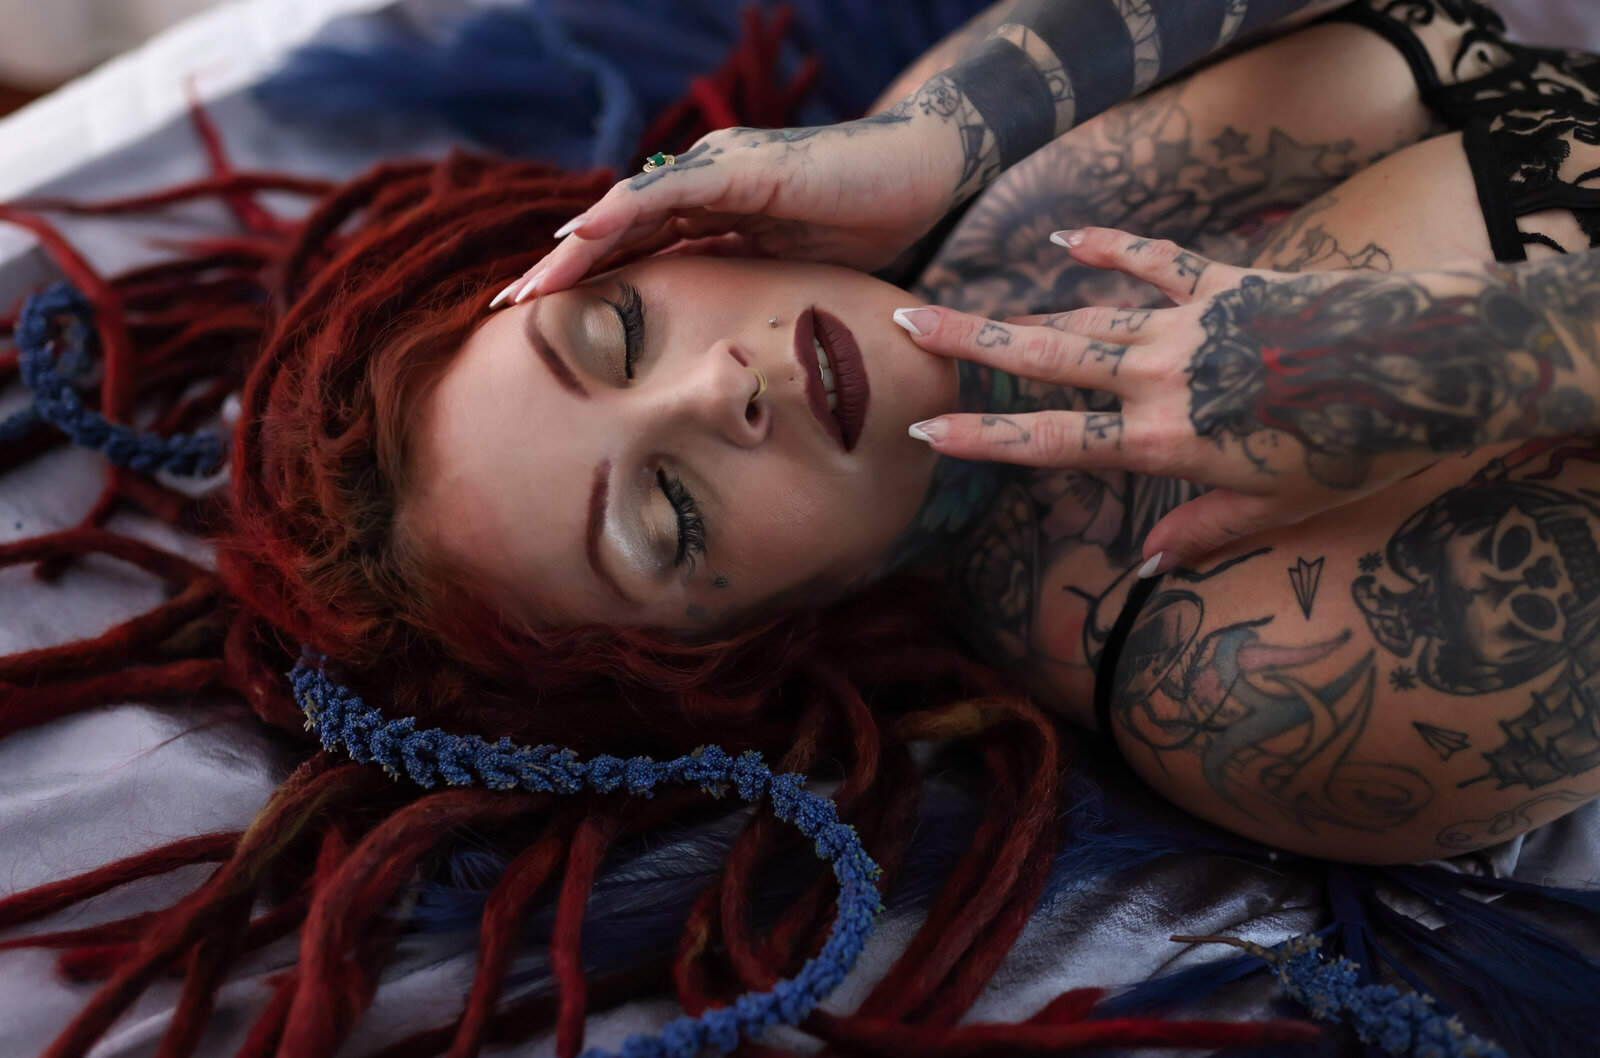 Savannah Georgia Boudoir Photography and Glamour boudoir portrait of Woman with tattoos and dreadlocks laying on bed with eyes closed and hands in face